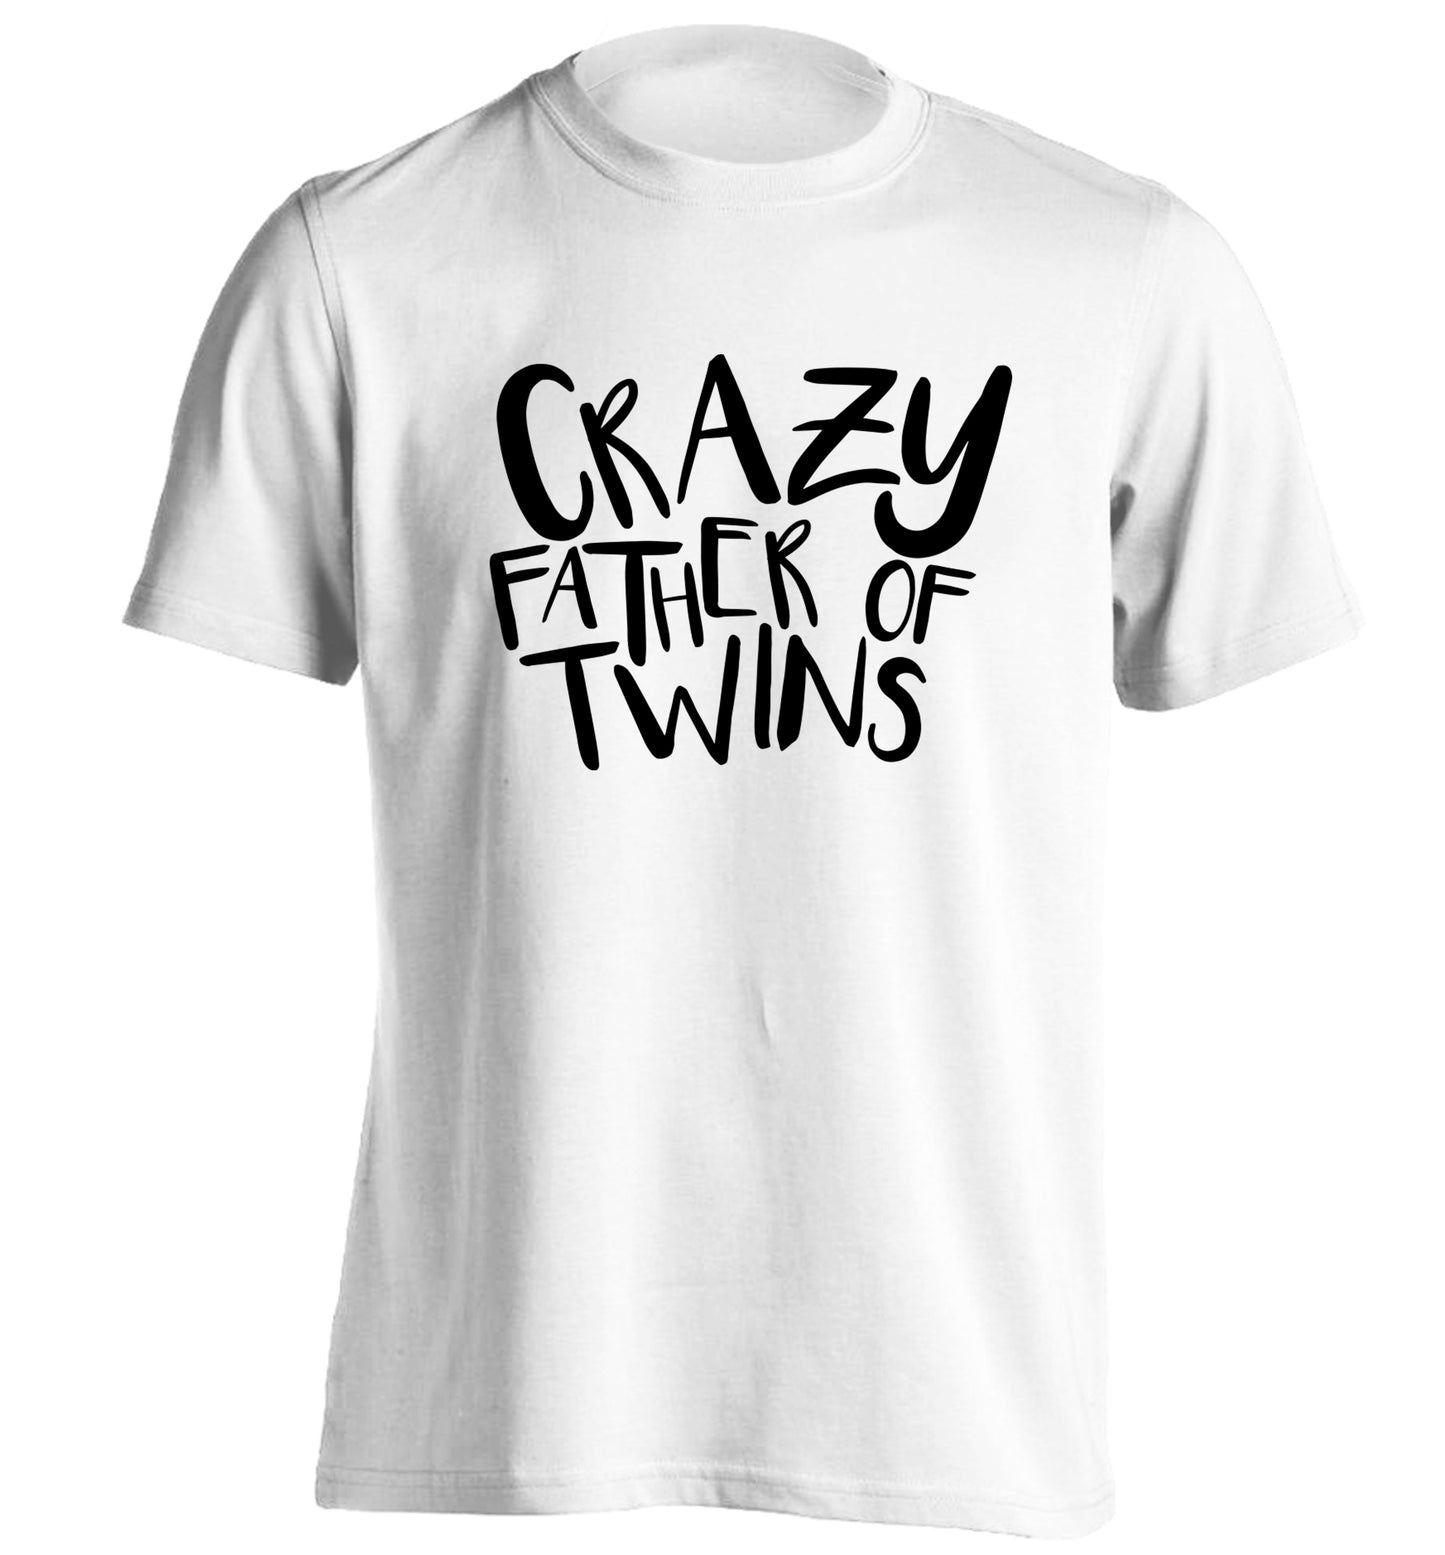 Crazy father of twins adults unisex white Tshirt 2XL